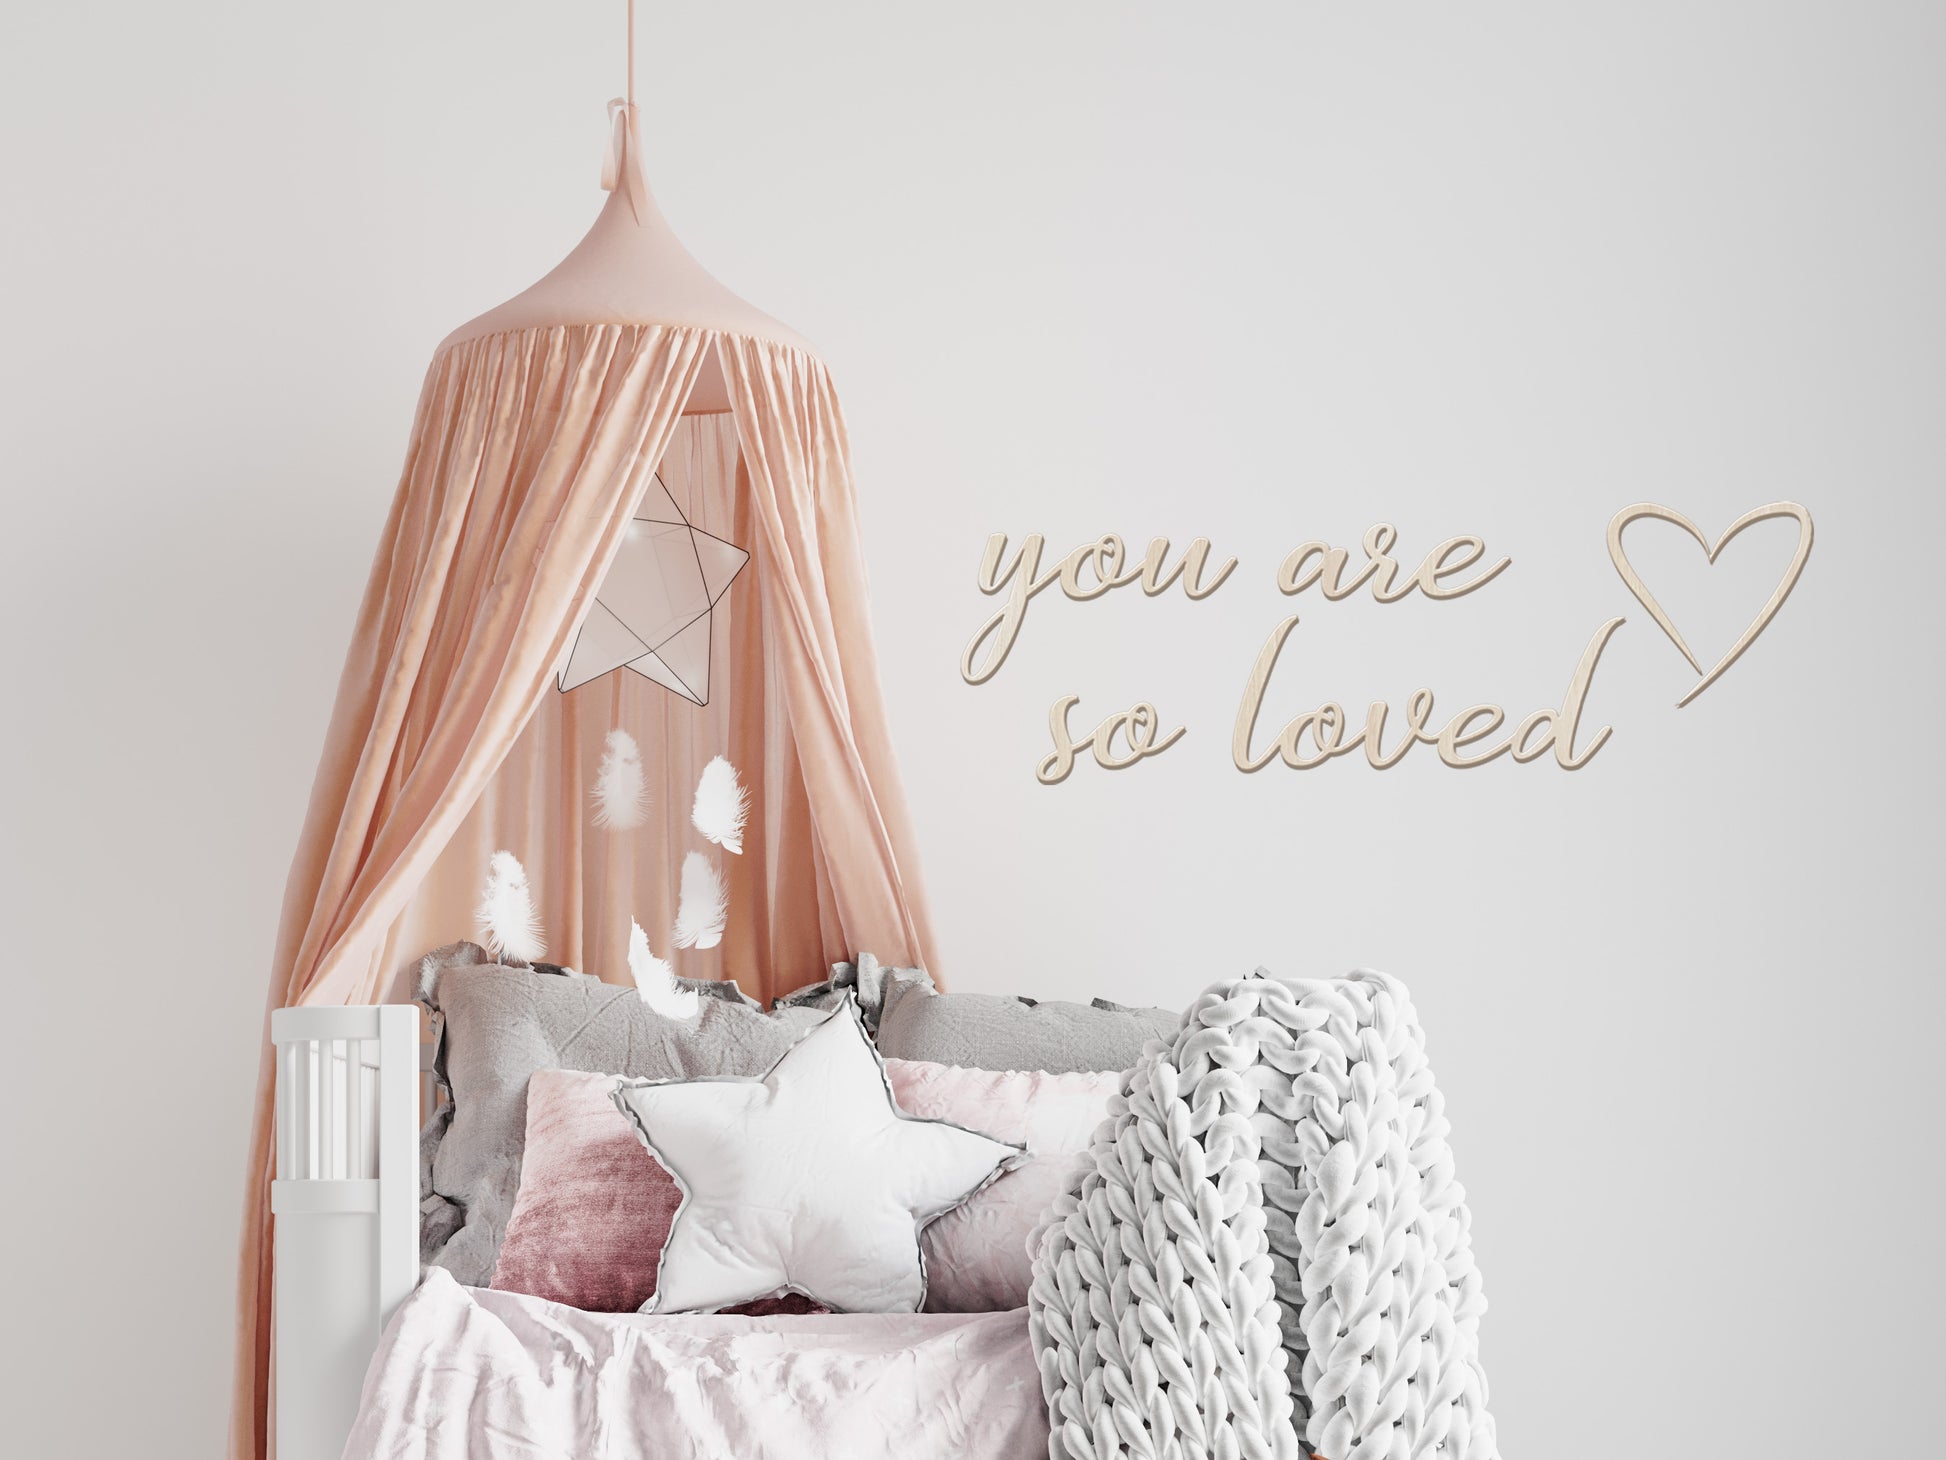 You are so loved - Wall Decals - Fable and Fawn 